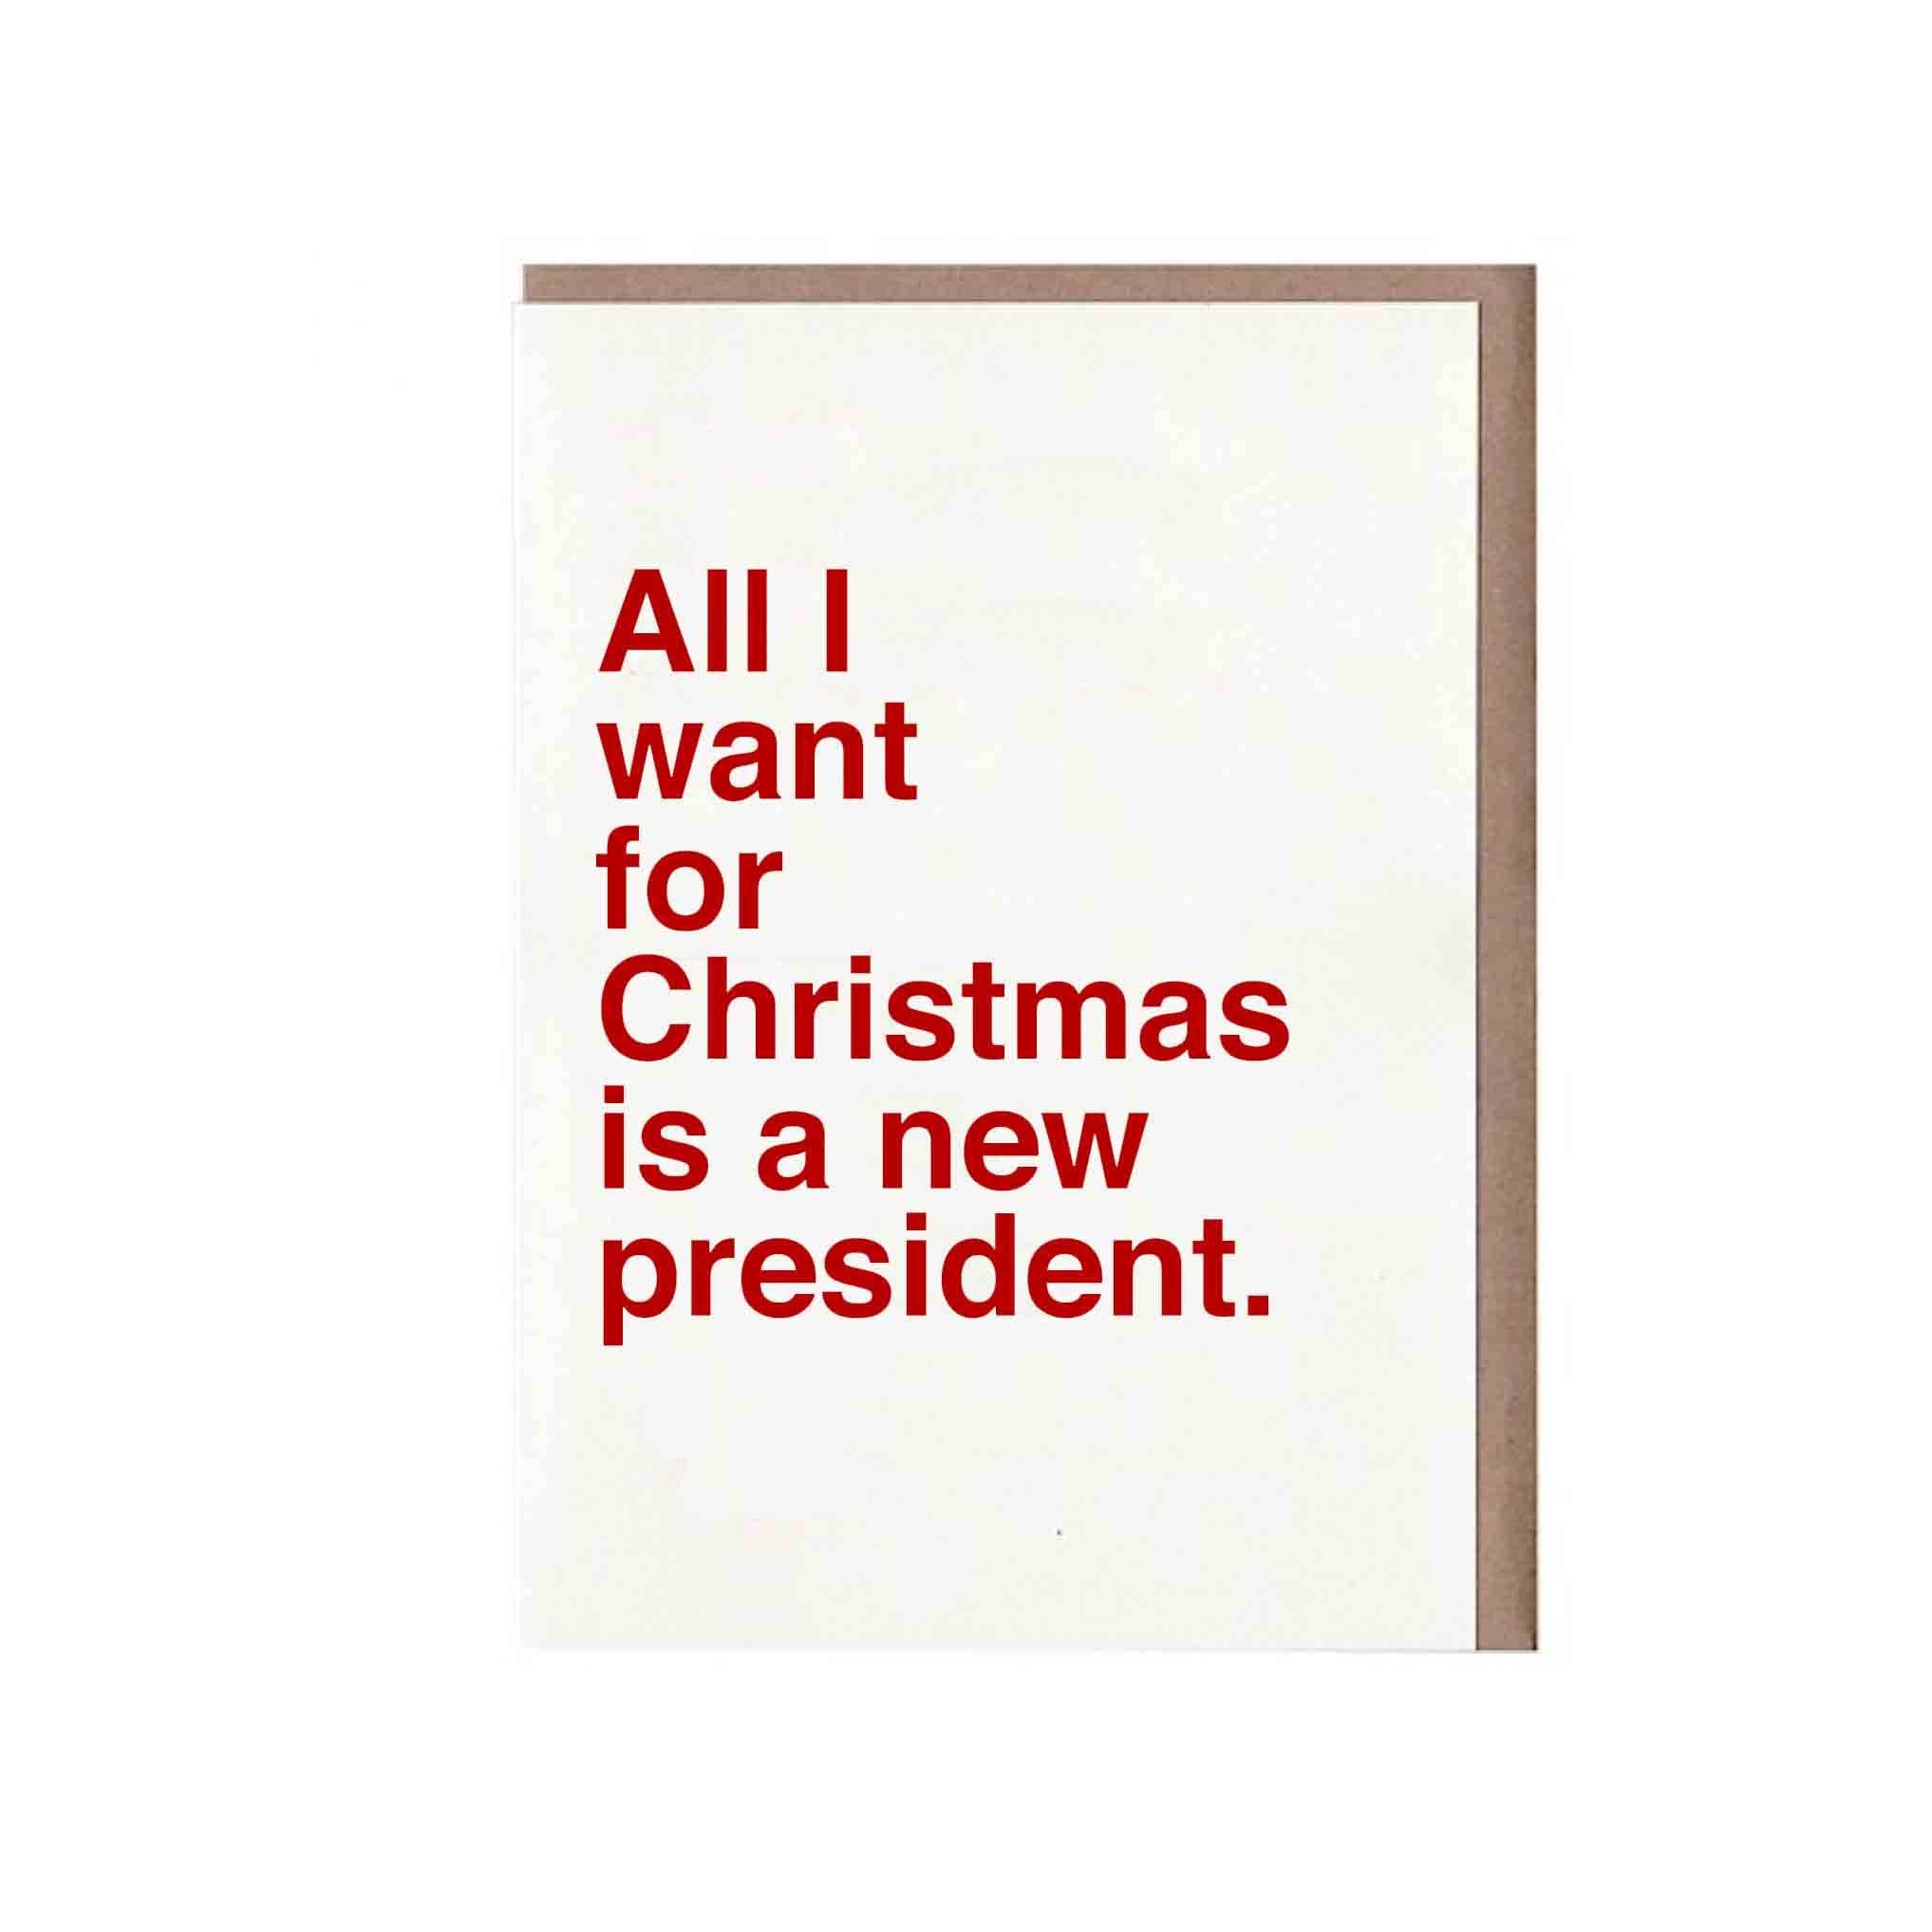 Sad Shop - All I Want For Christmas Is A New President